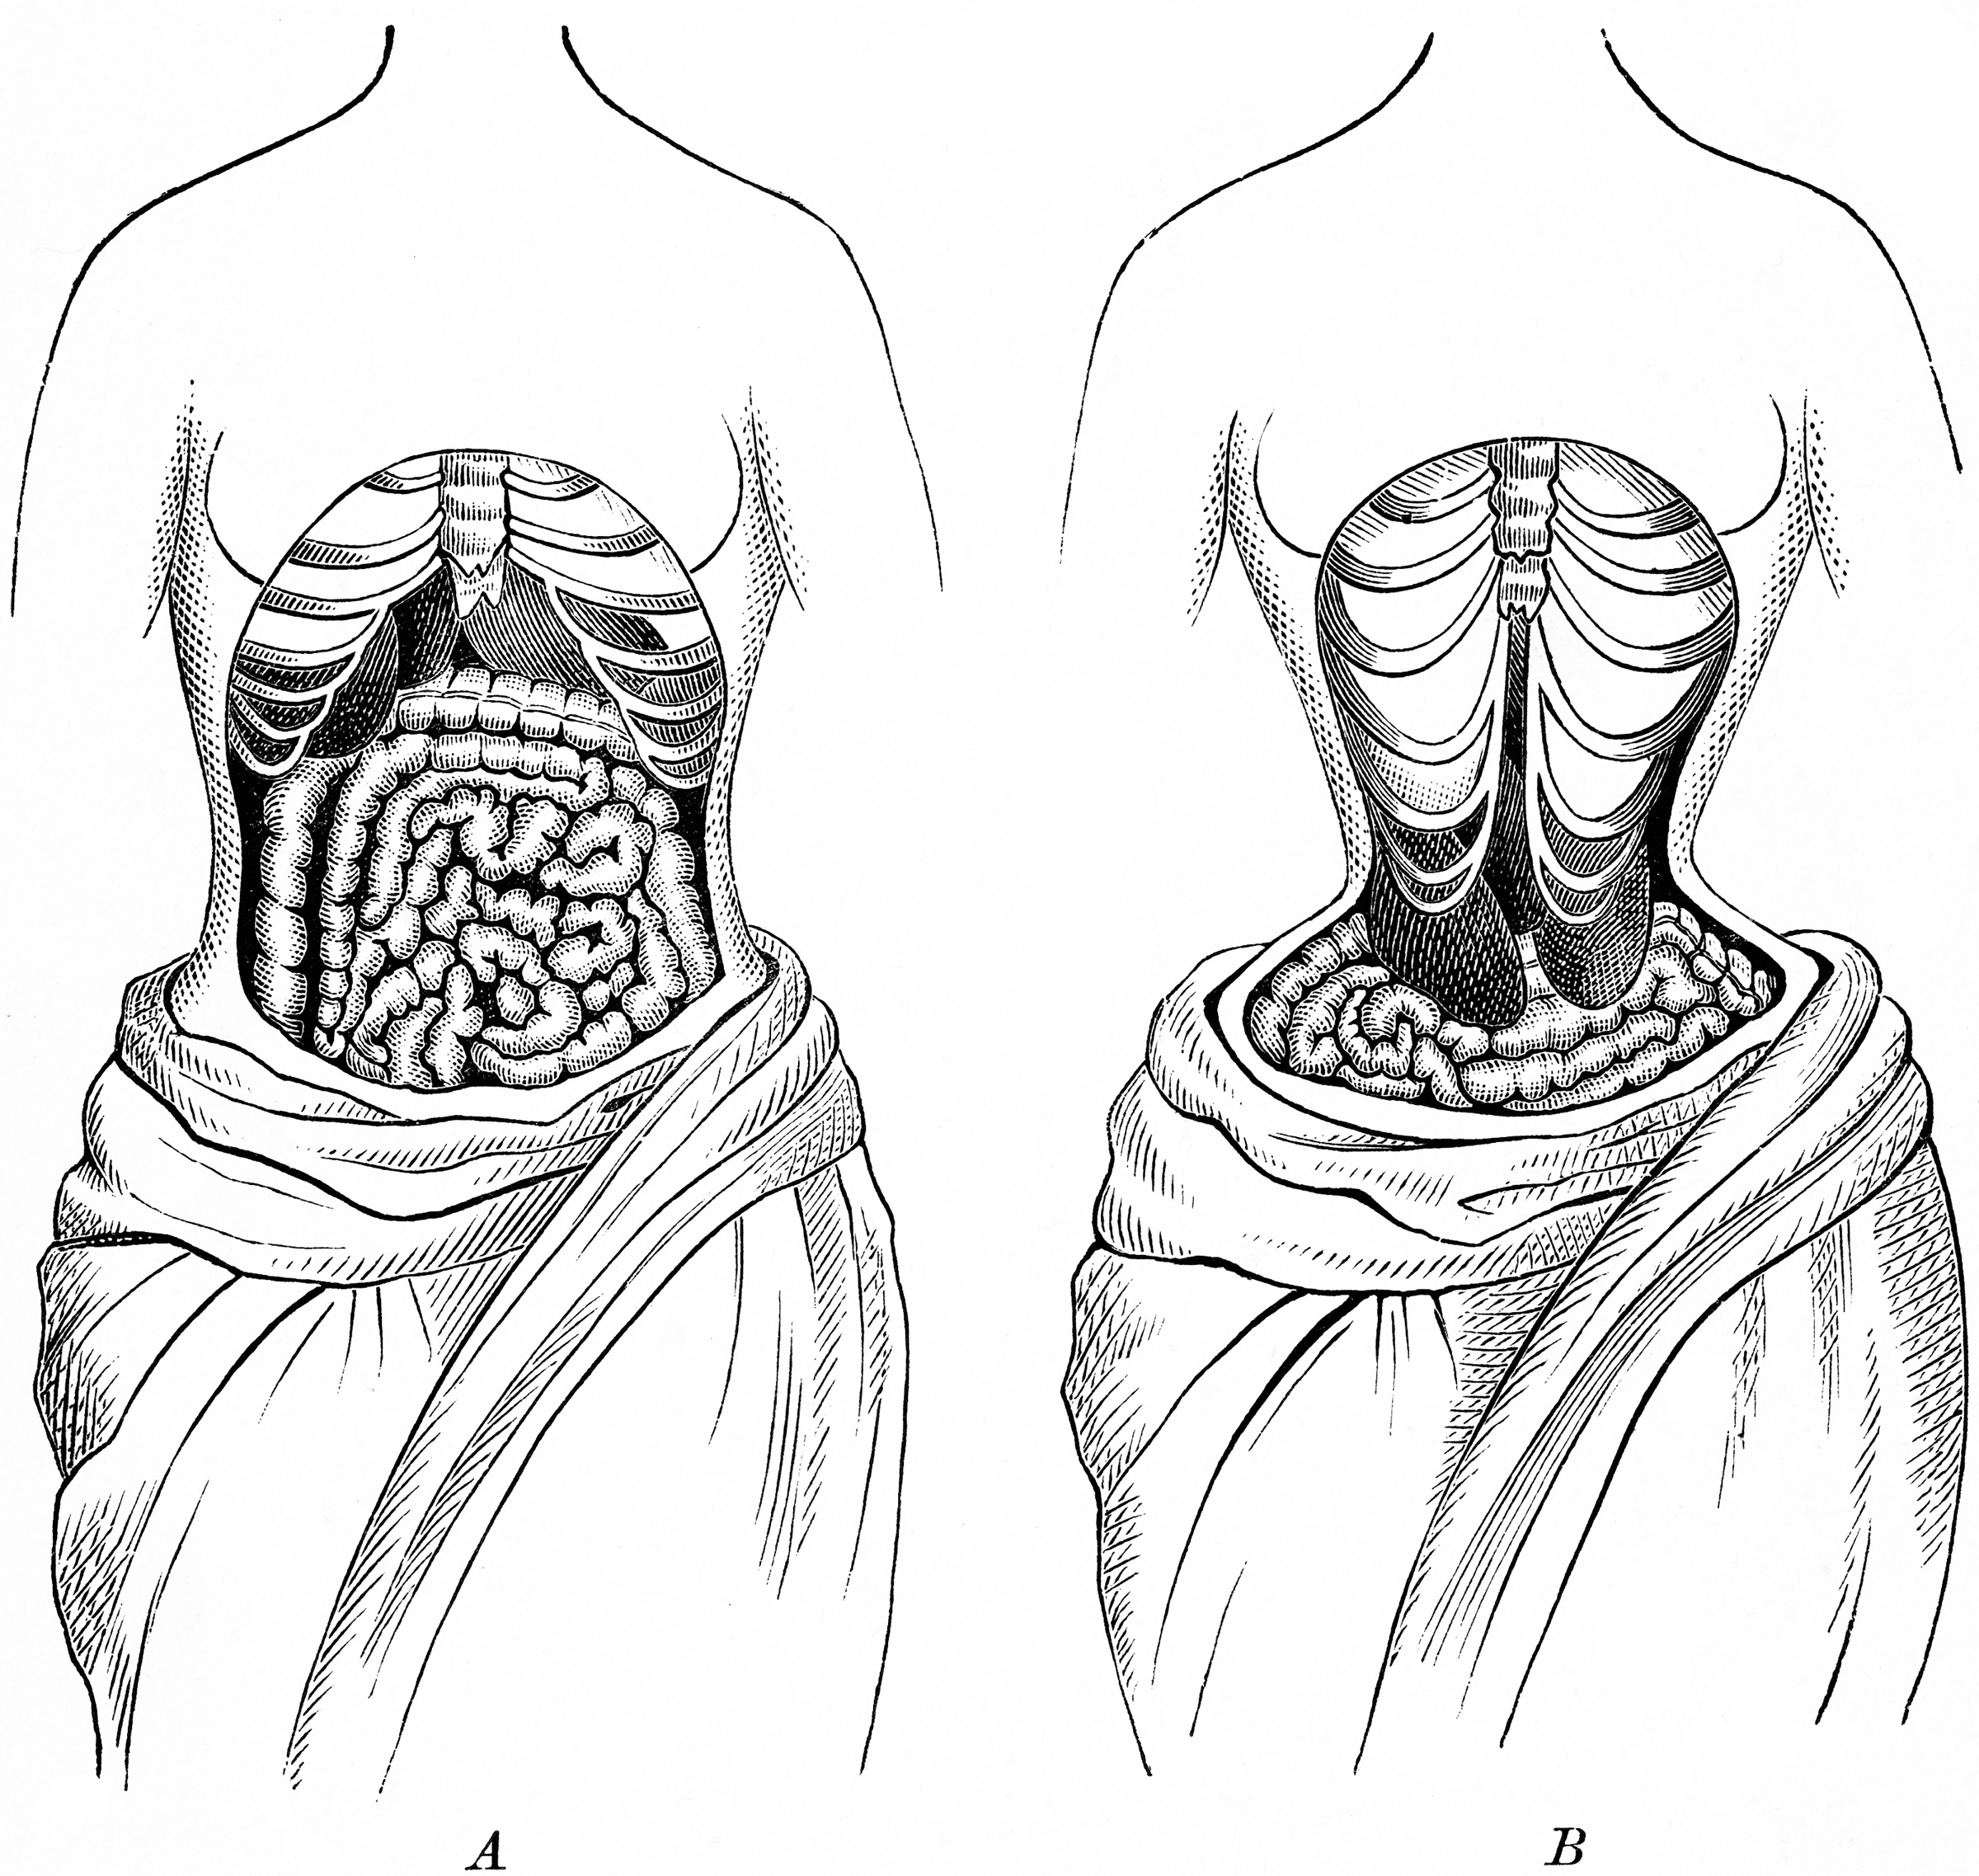 The Natural Position Compared to the Deformed Position of the Internal